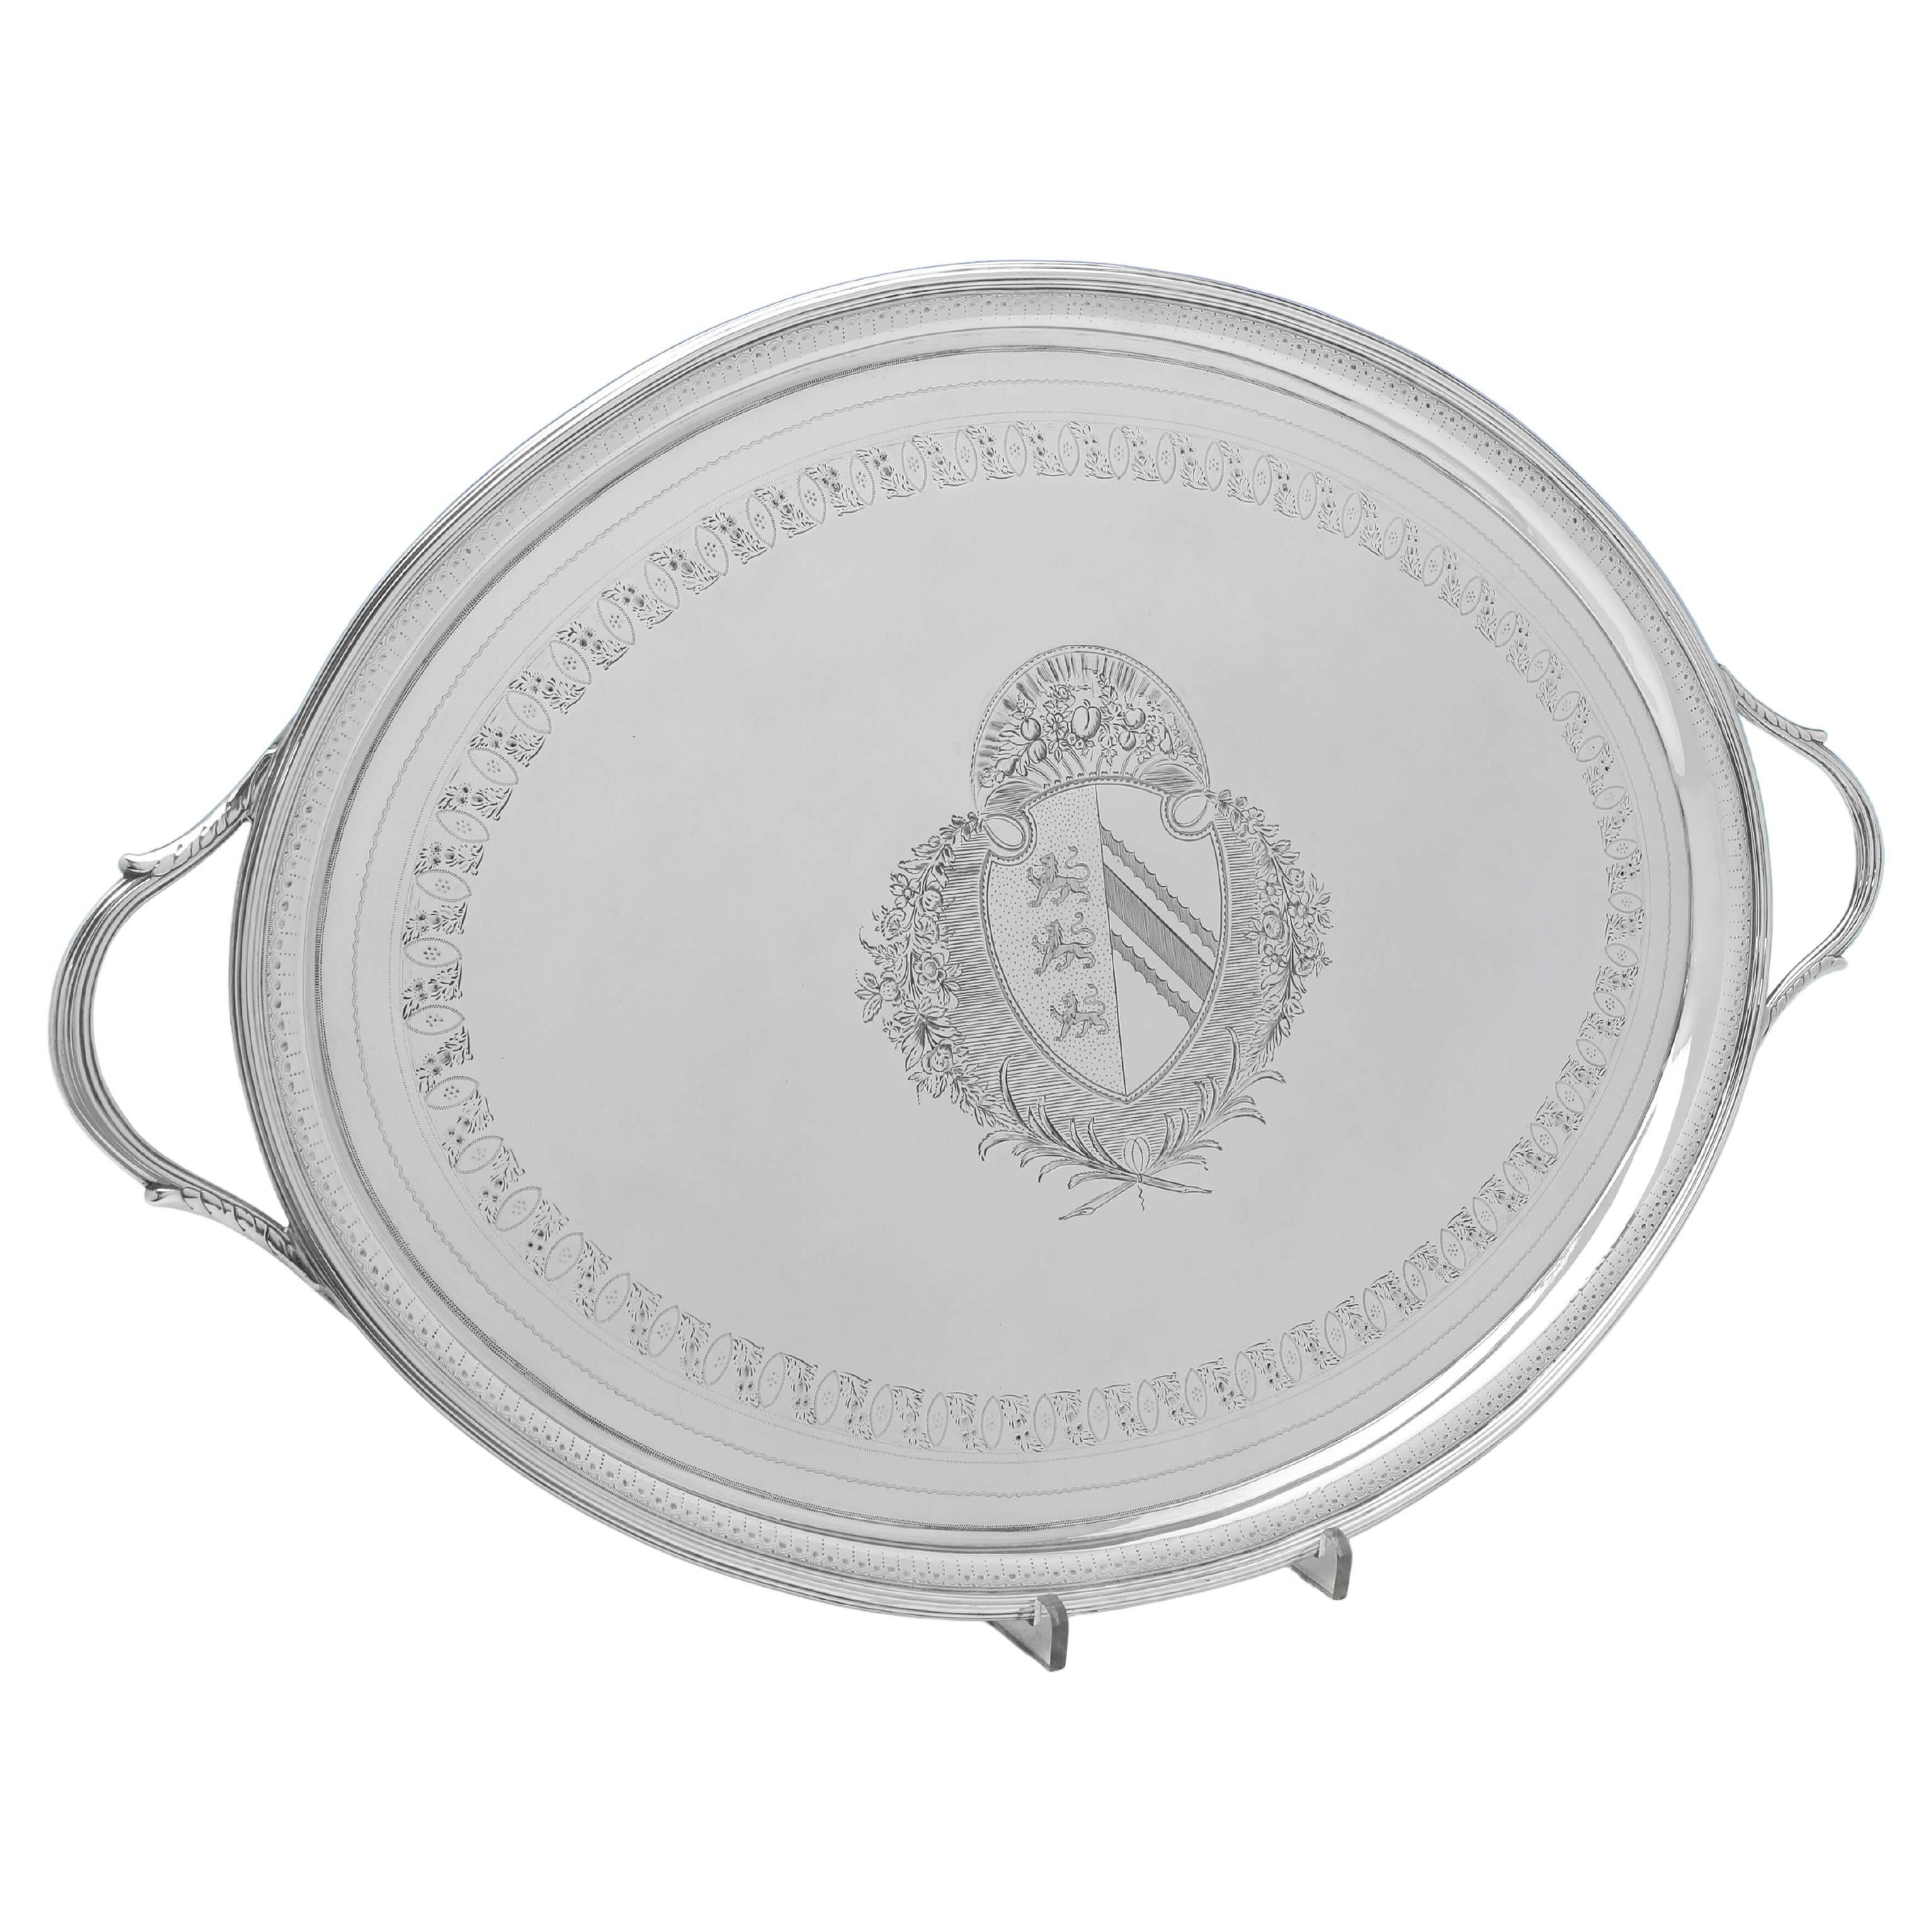 Striking Engraved Neoclassical Antique Sterling Silver Tray, London 1798 For Sale